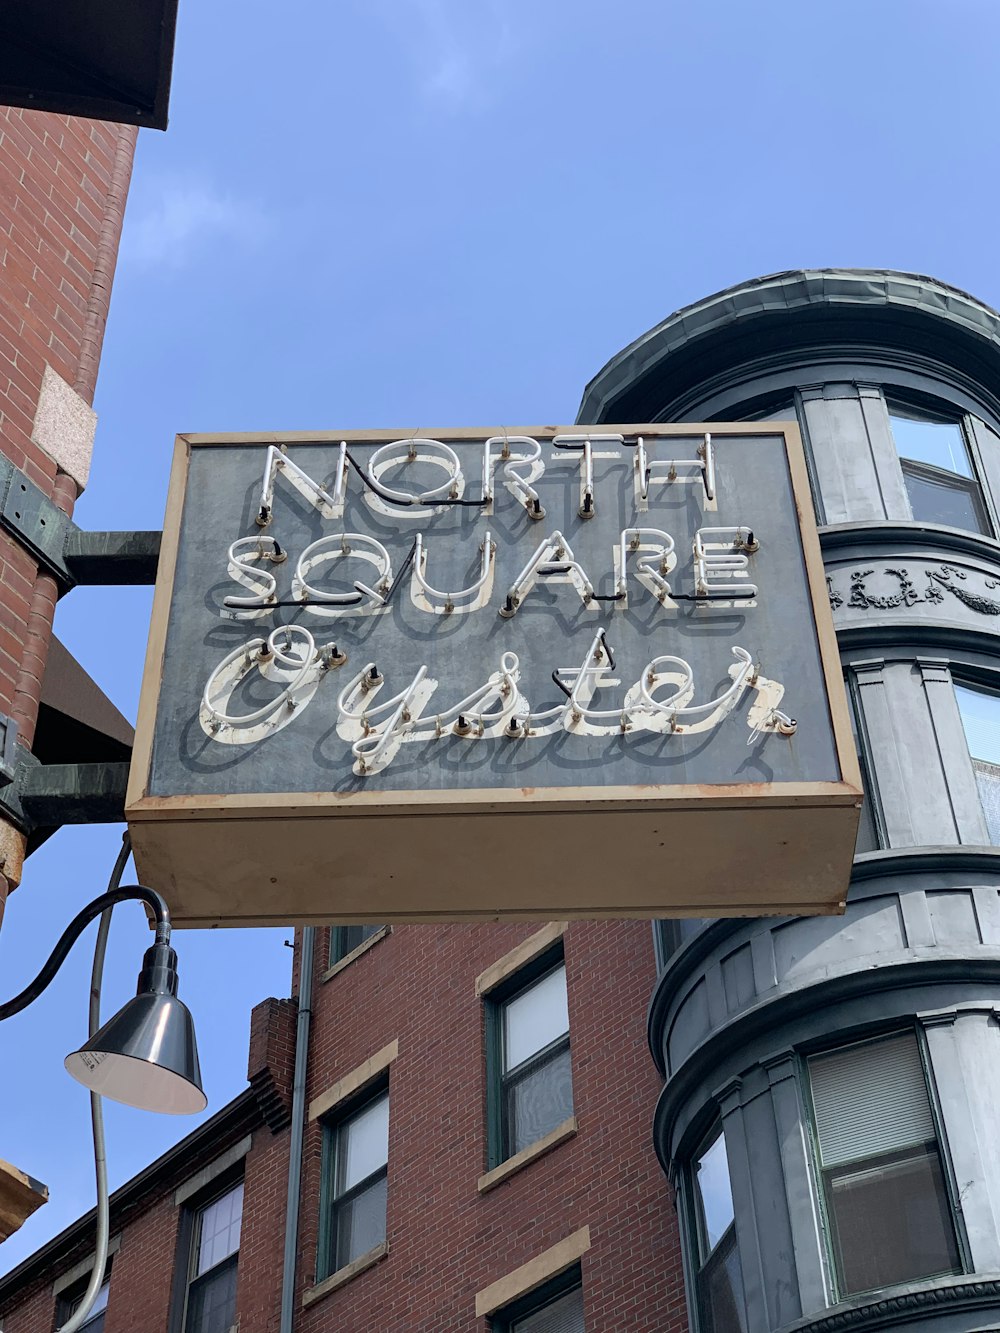 North Square Oyster signage